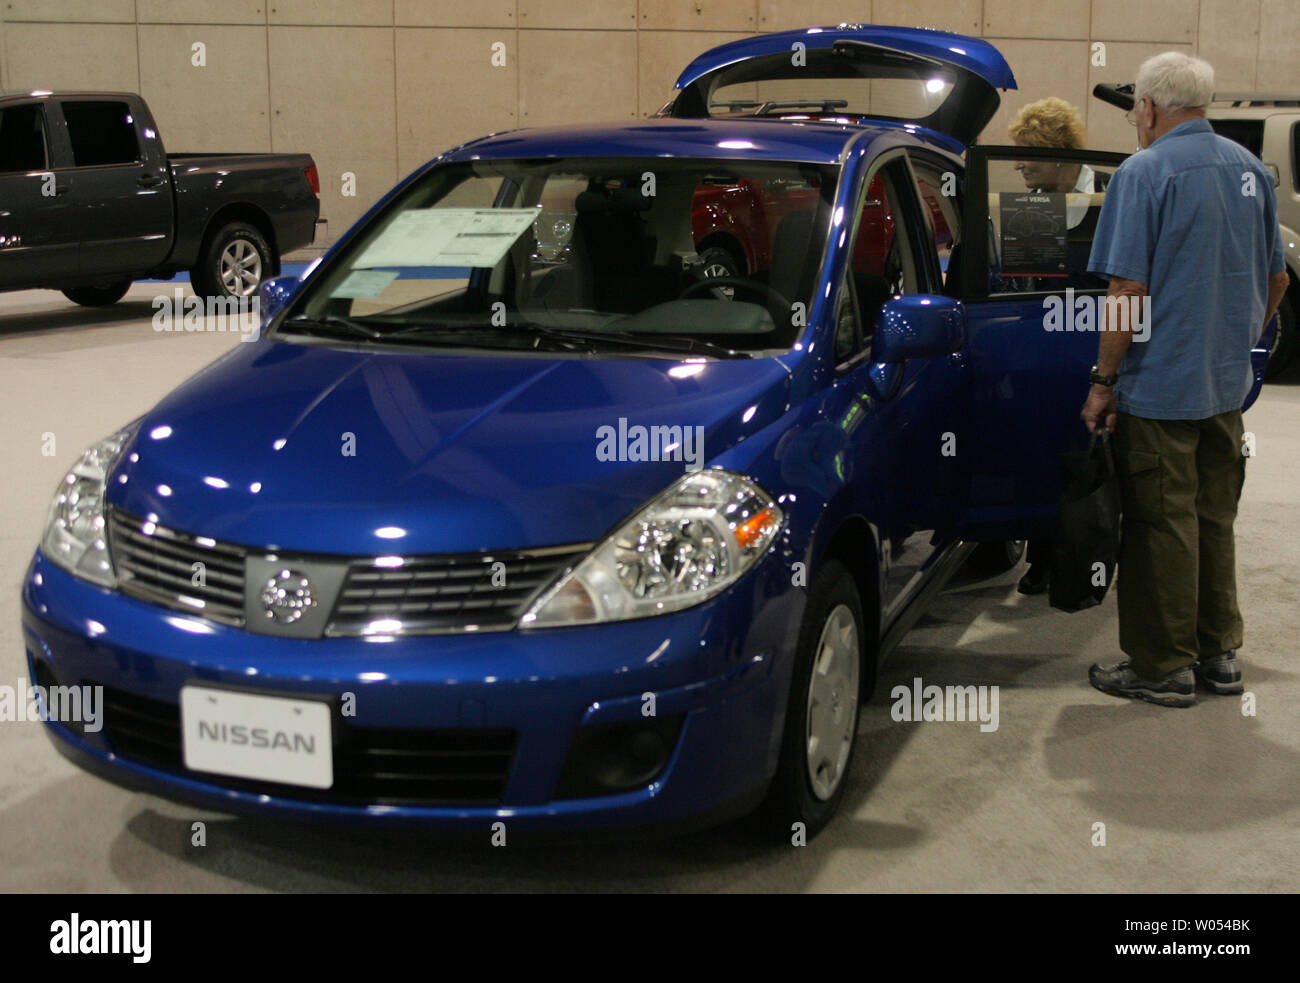 A Nissan Versa 1 8s Hb Is On Display At The 2009 San Diego